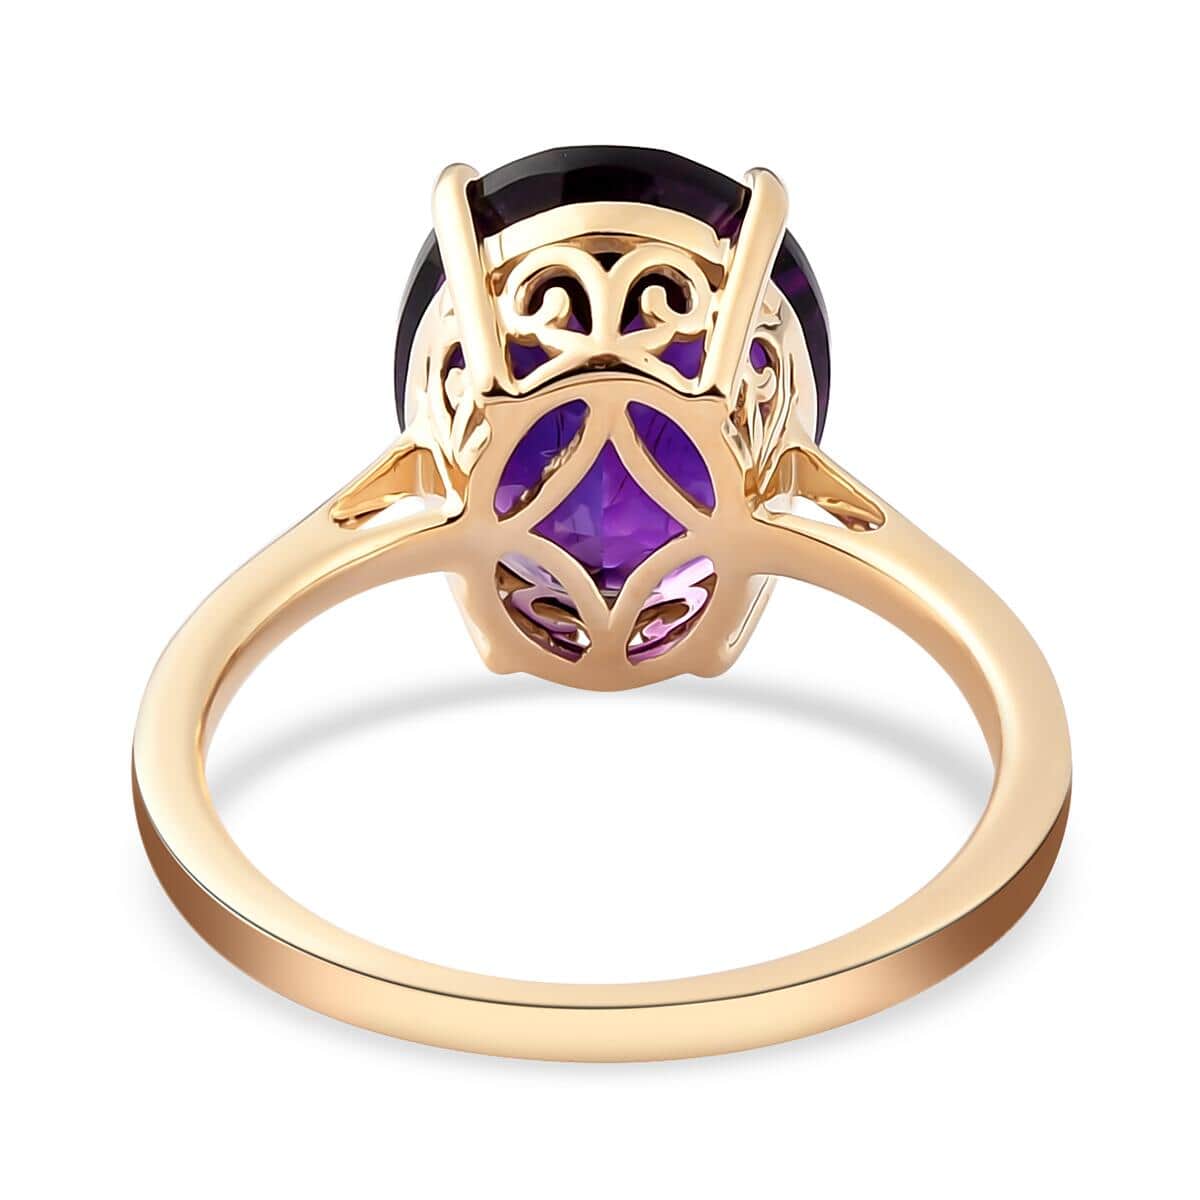 LUXORO 10K Yellow Gold AAA Moroccan Amethyst Solitaire Ring (Size 7.0) 2.40 Grams (Delivery in 12-15 Business Days) 5.15 ctw image number 4